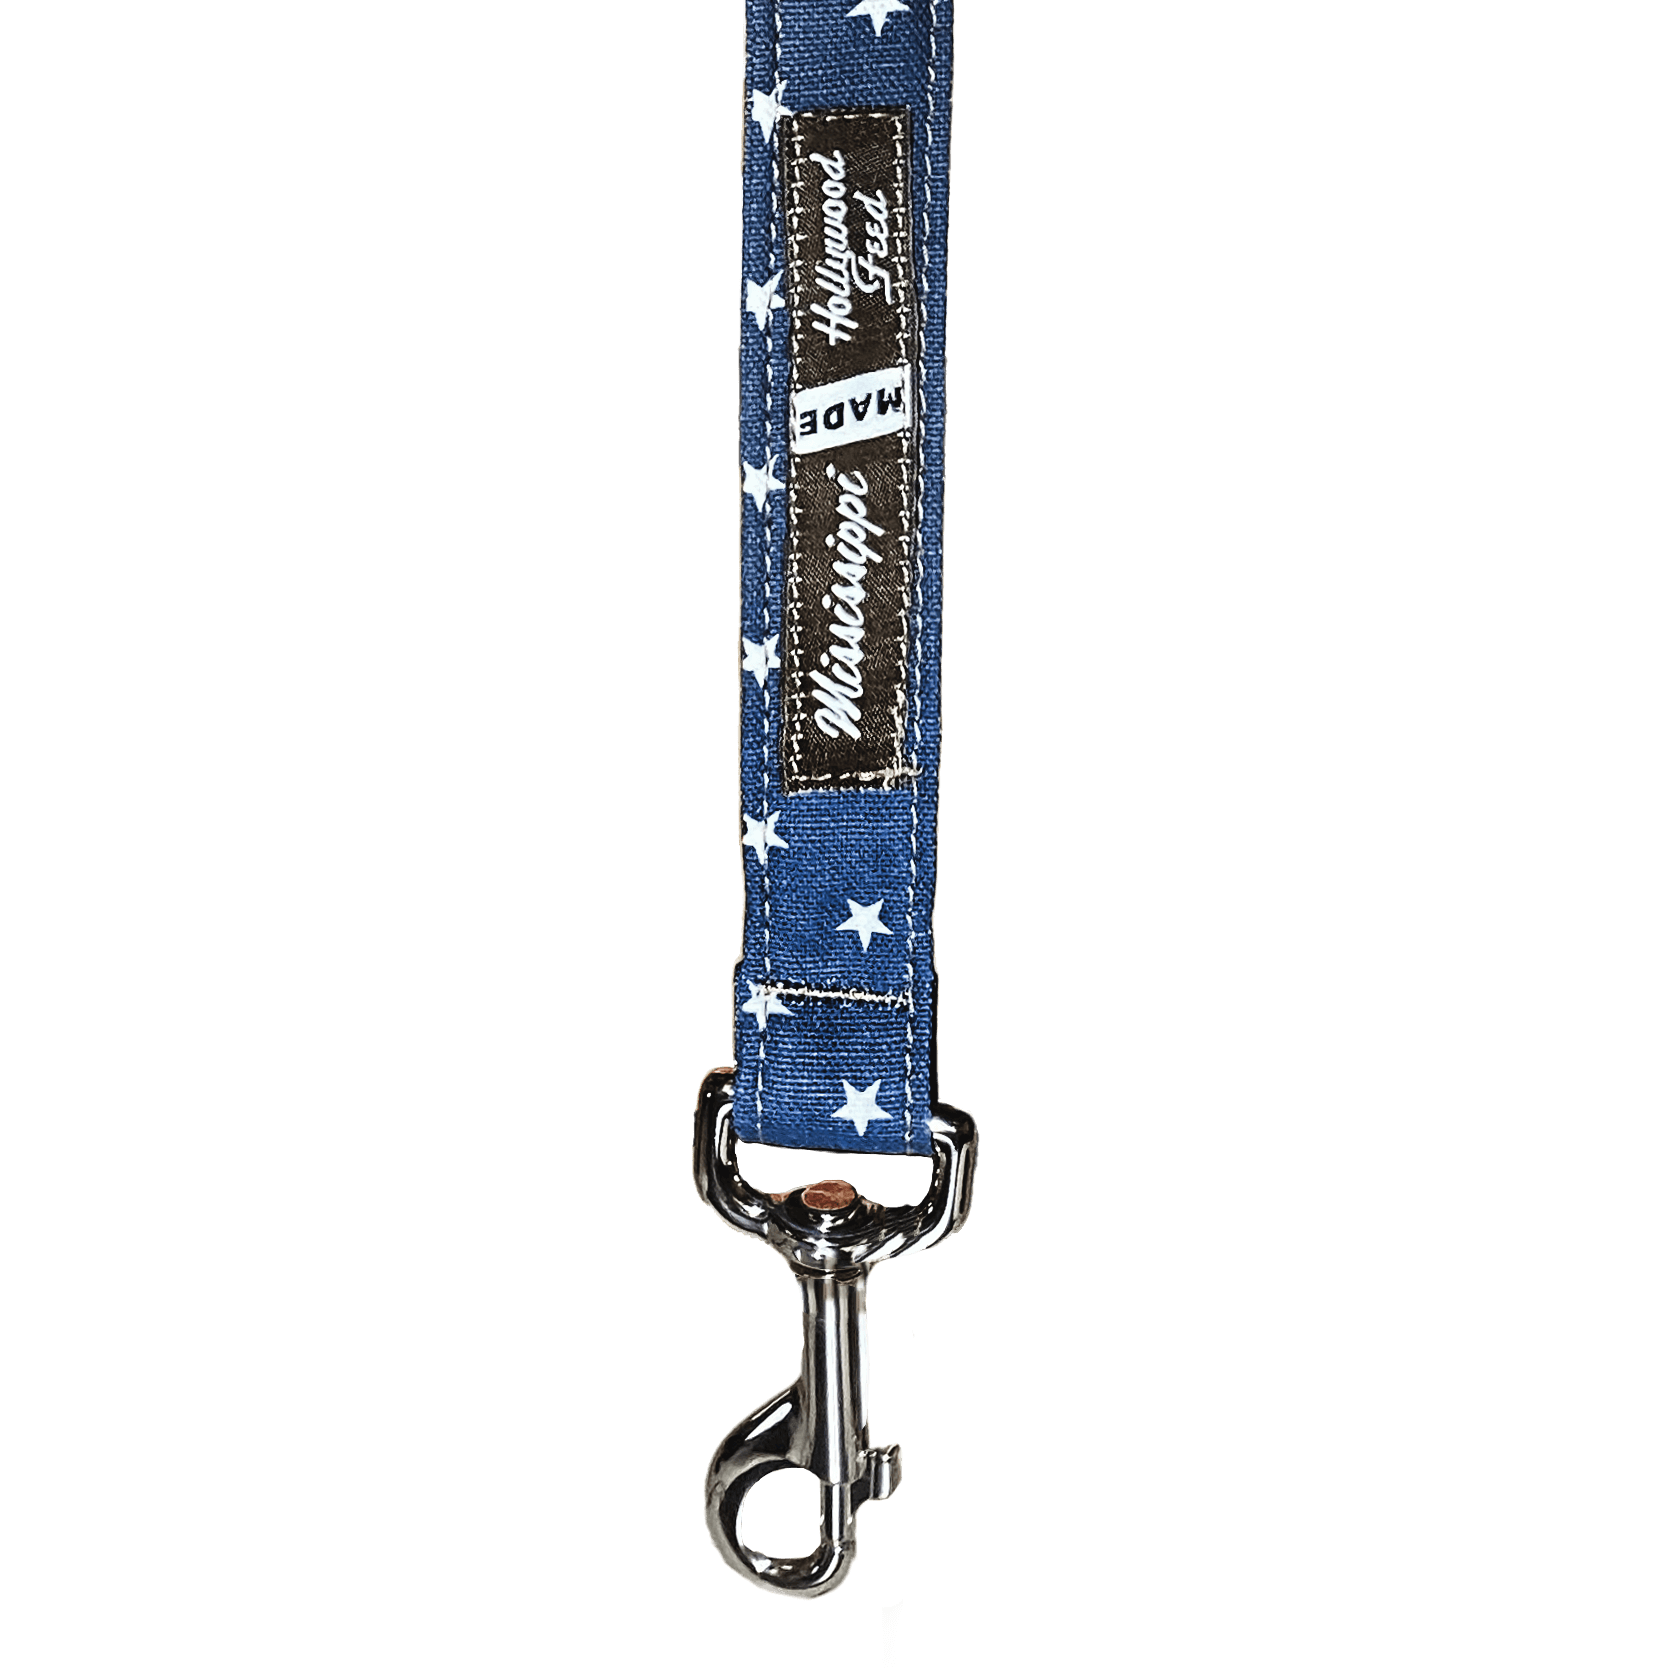 Hollywood Feed Mississippi Made Dog Leash Mini Star Navy 6 foot by 1 inch